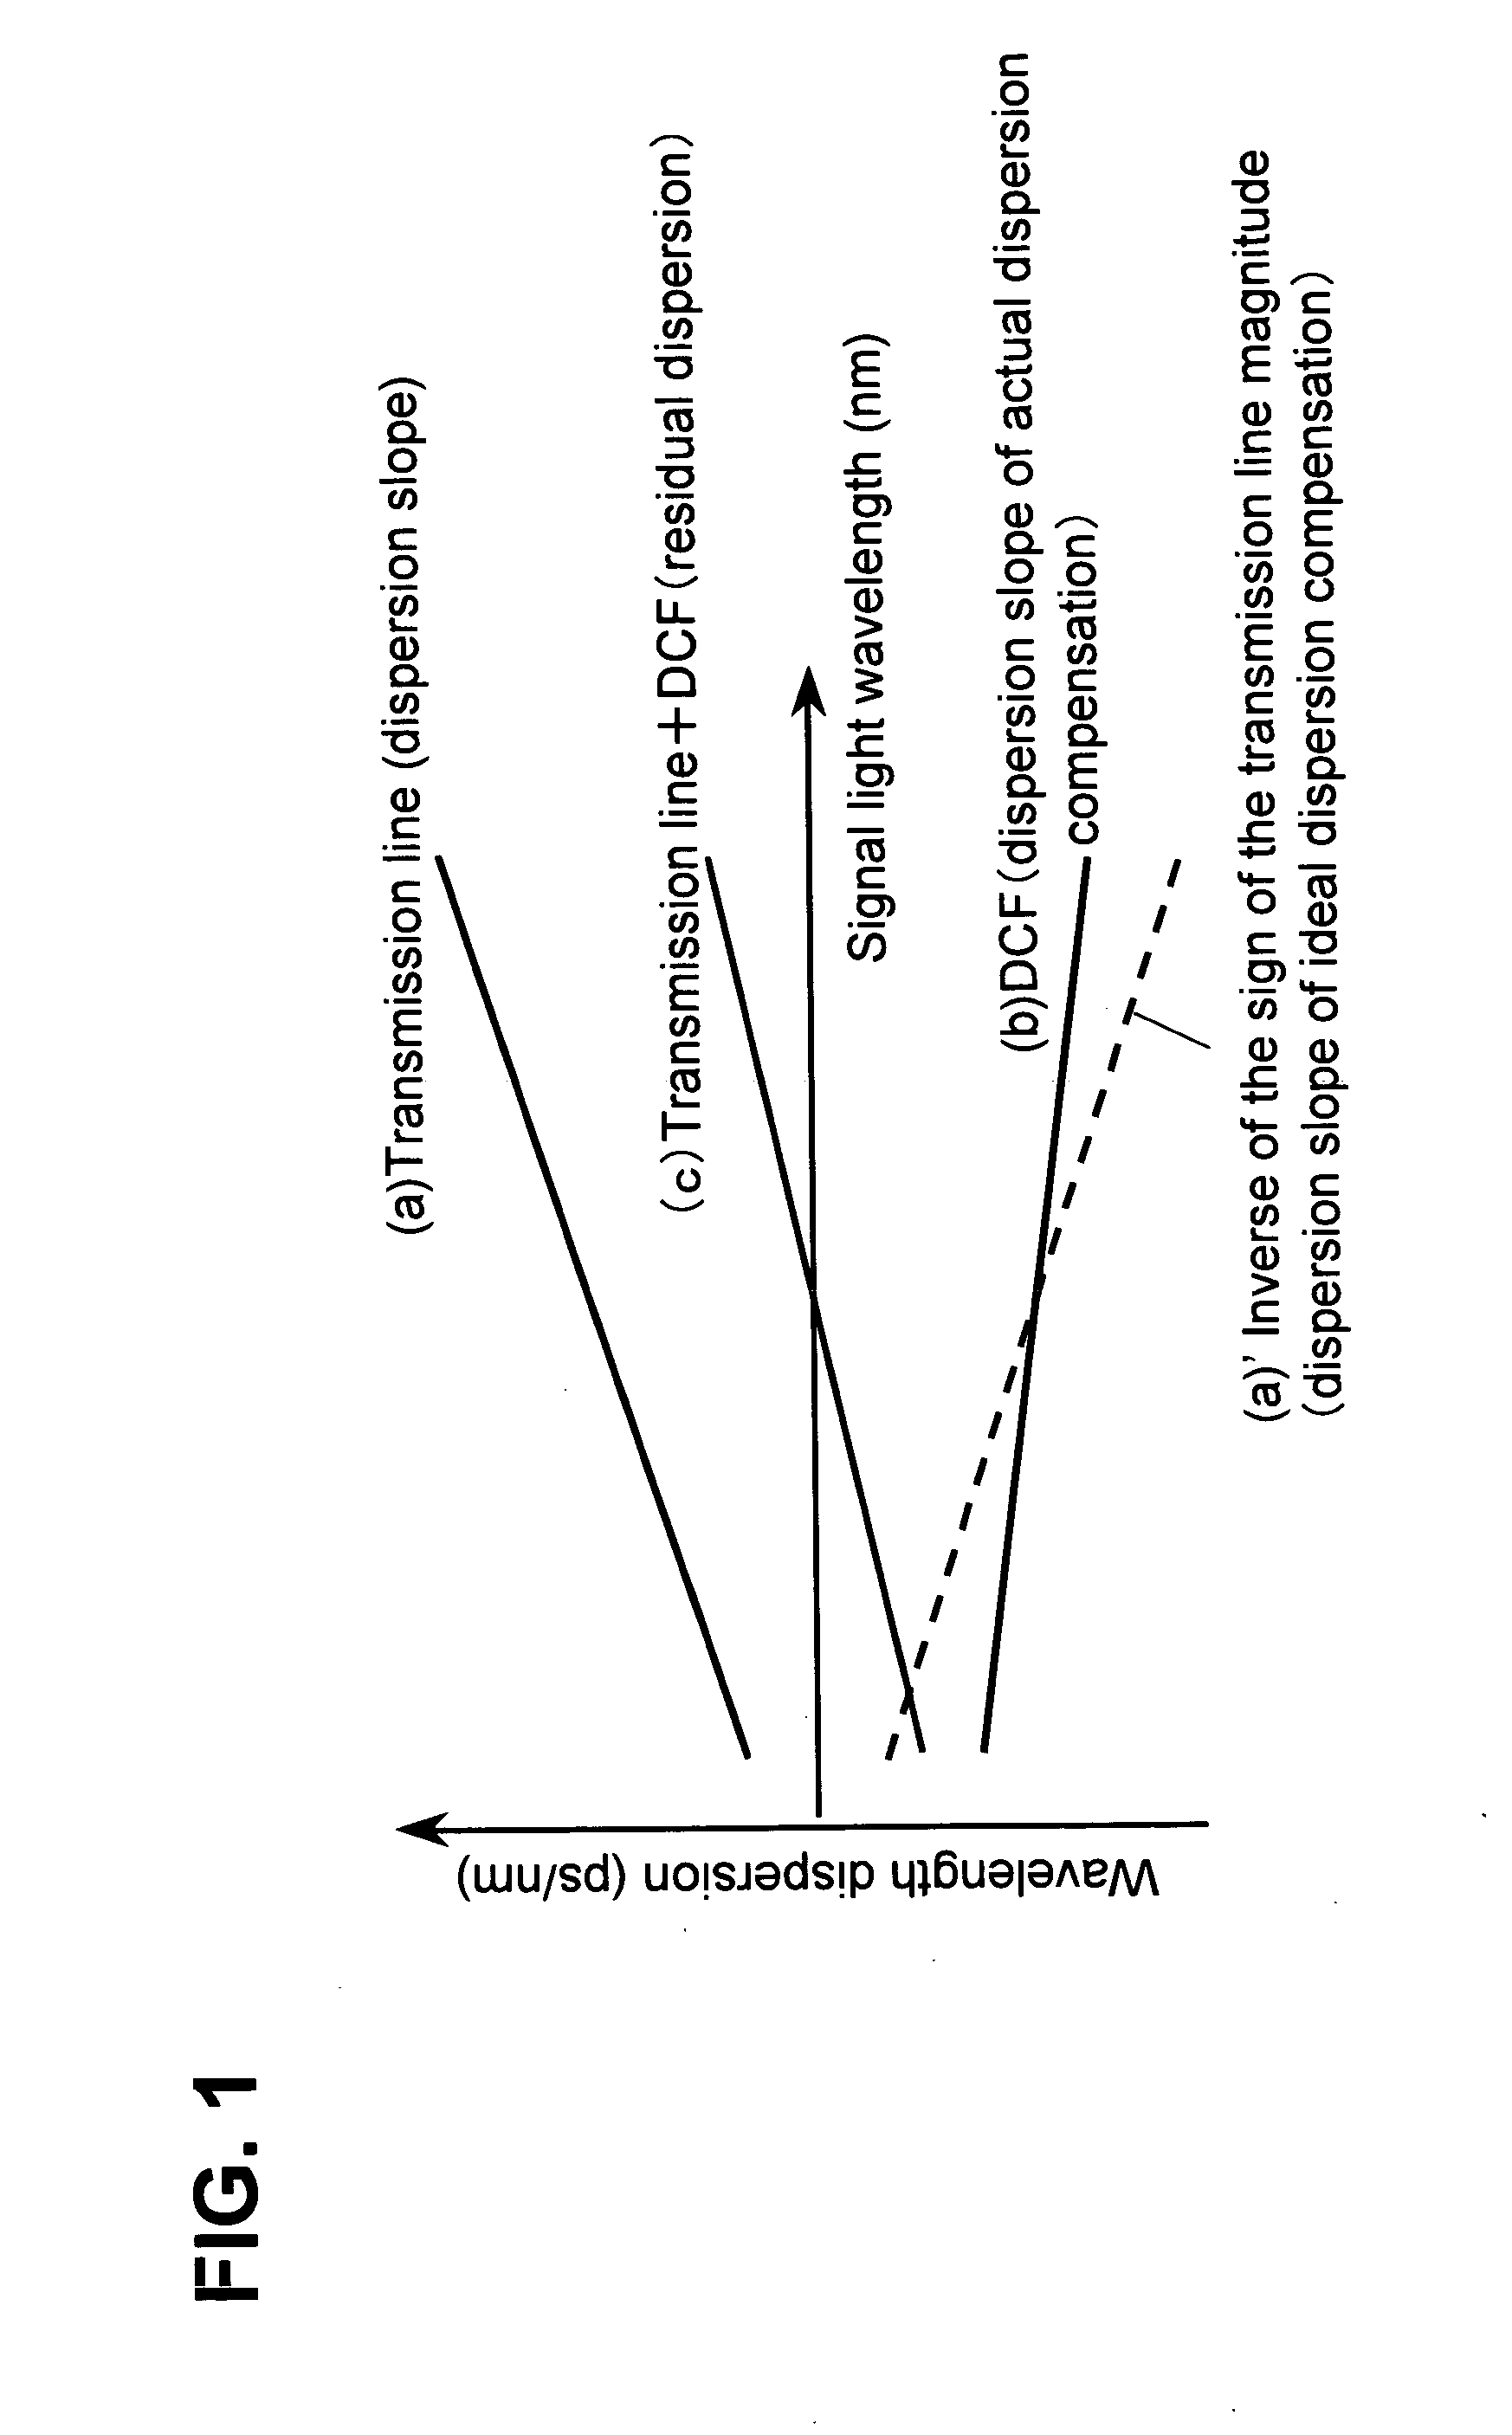 Wavelength division multiplexing optical transmission system and wavelength dispersion compensation unit